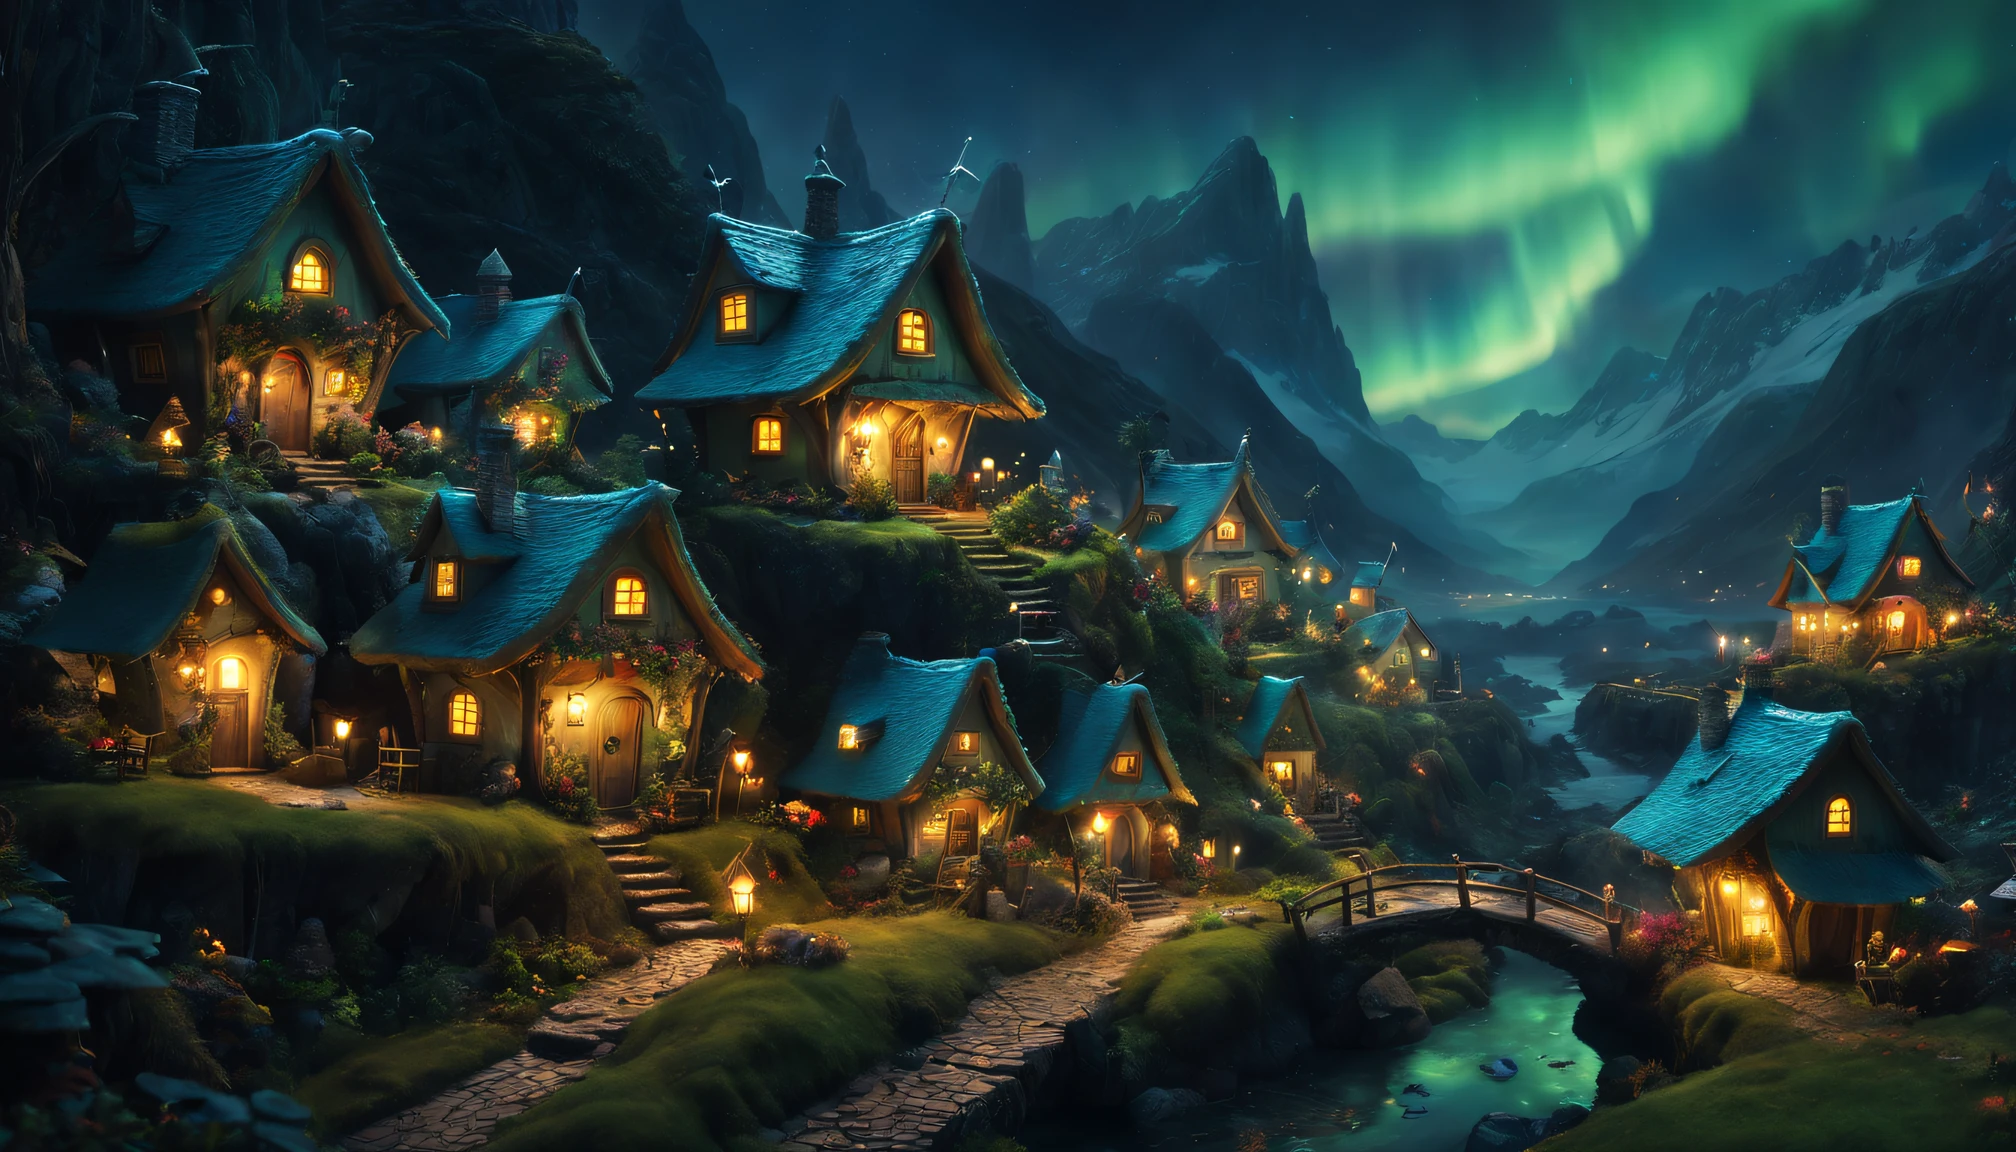 masterpiece, miniature, 100mm shot, (beautiful and aesthetic), highly detailed, concept art, medium shot, panoramic, a small fairy village, cozy, winter, night, snowy, bustling fairy, ethereal atmosphere, vibrant color, cinematic lighting, epic composition, epic proportion, HD